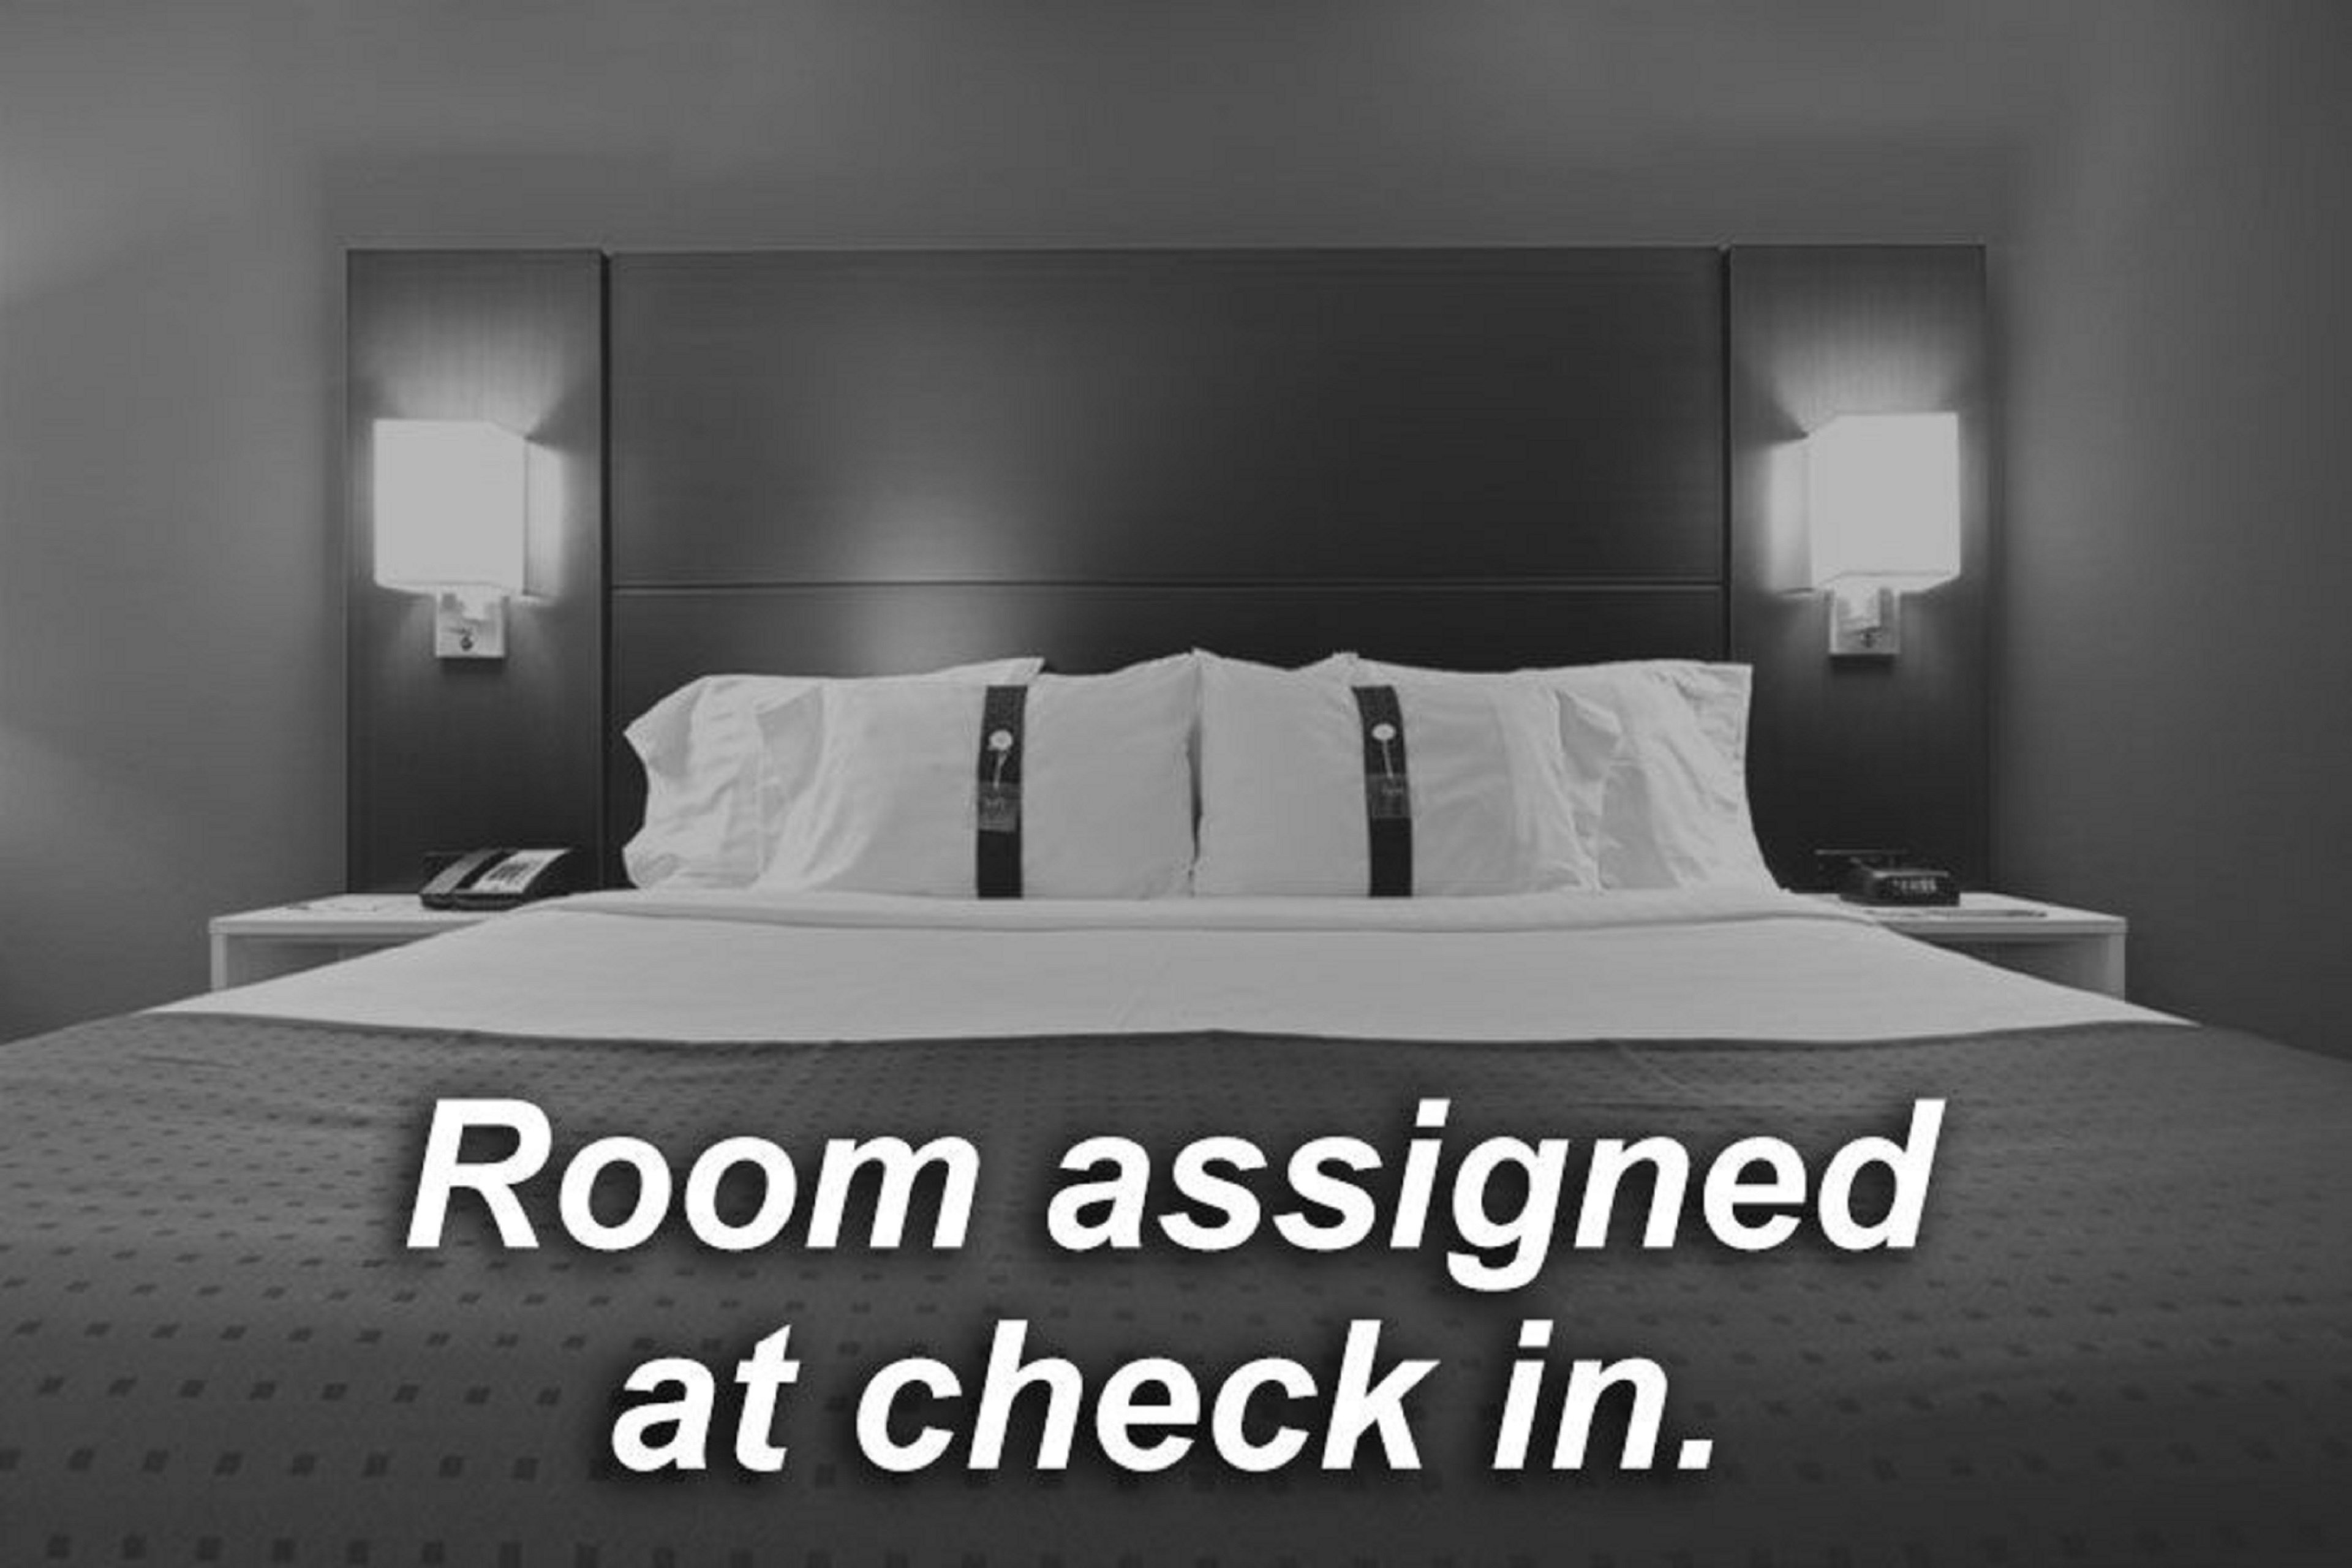 Standard Guest Room assigned at check-in